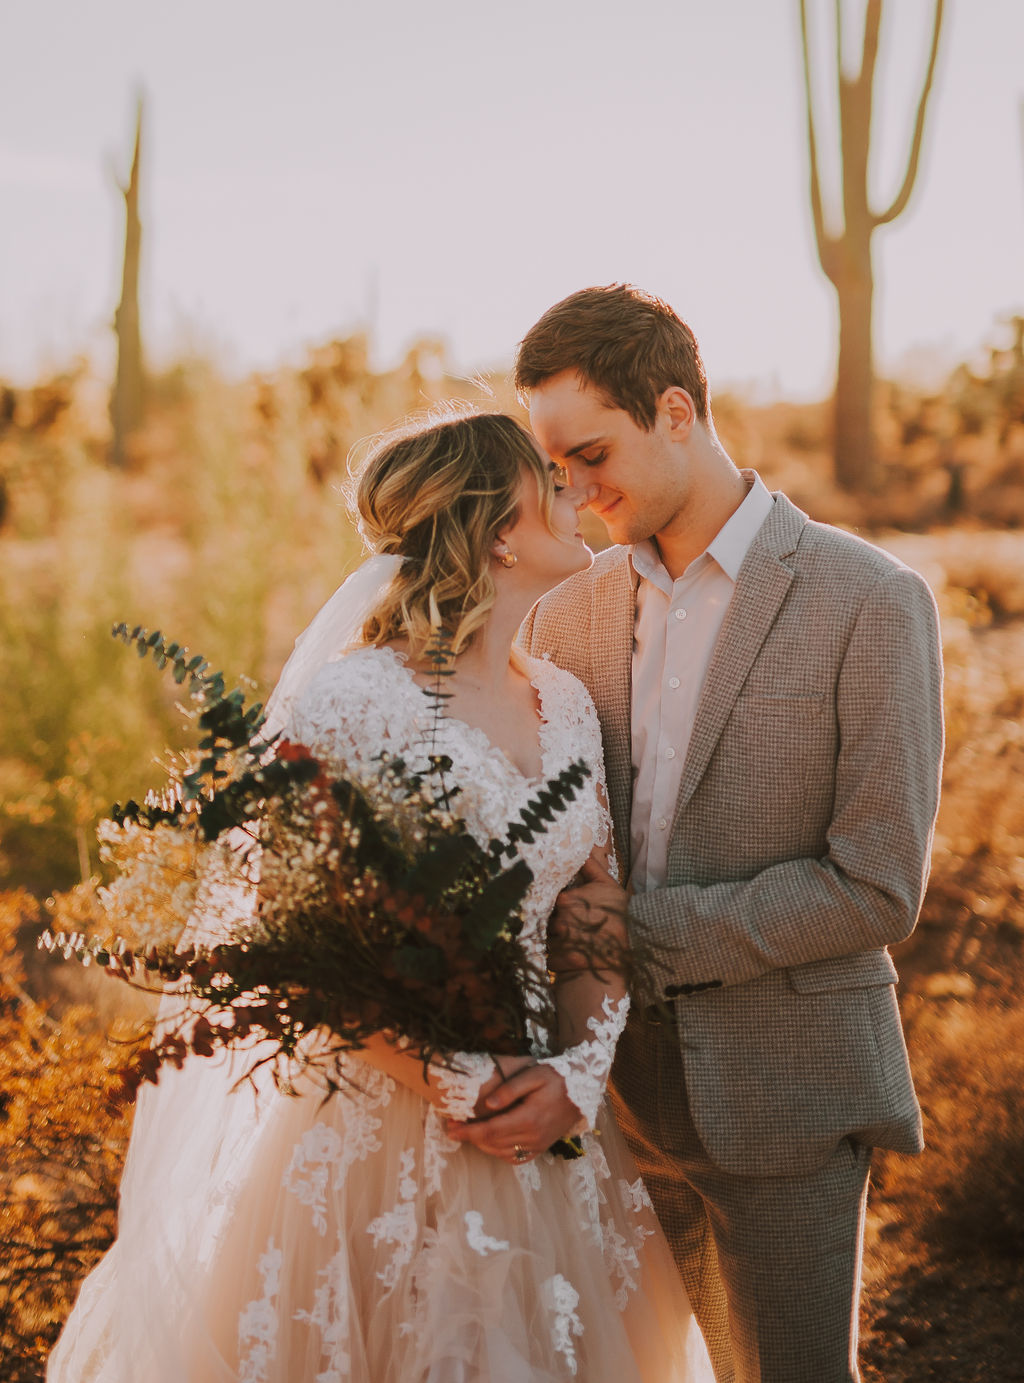 Arizona Elopement in front of cacti the bride and groom are looking at each other